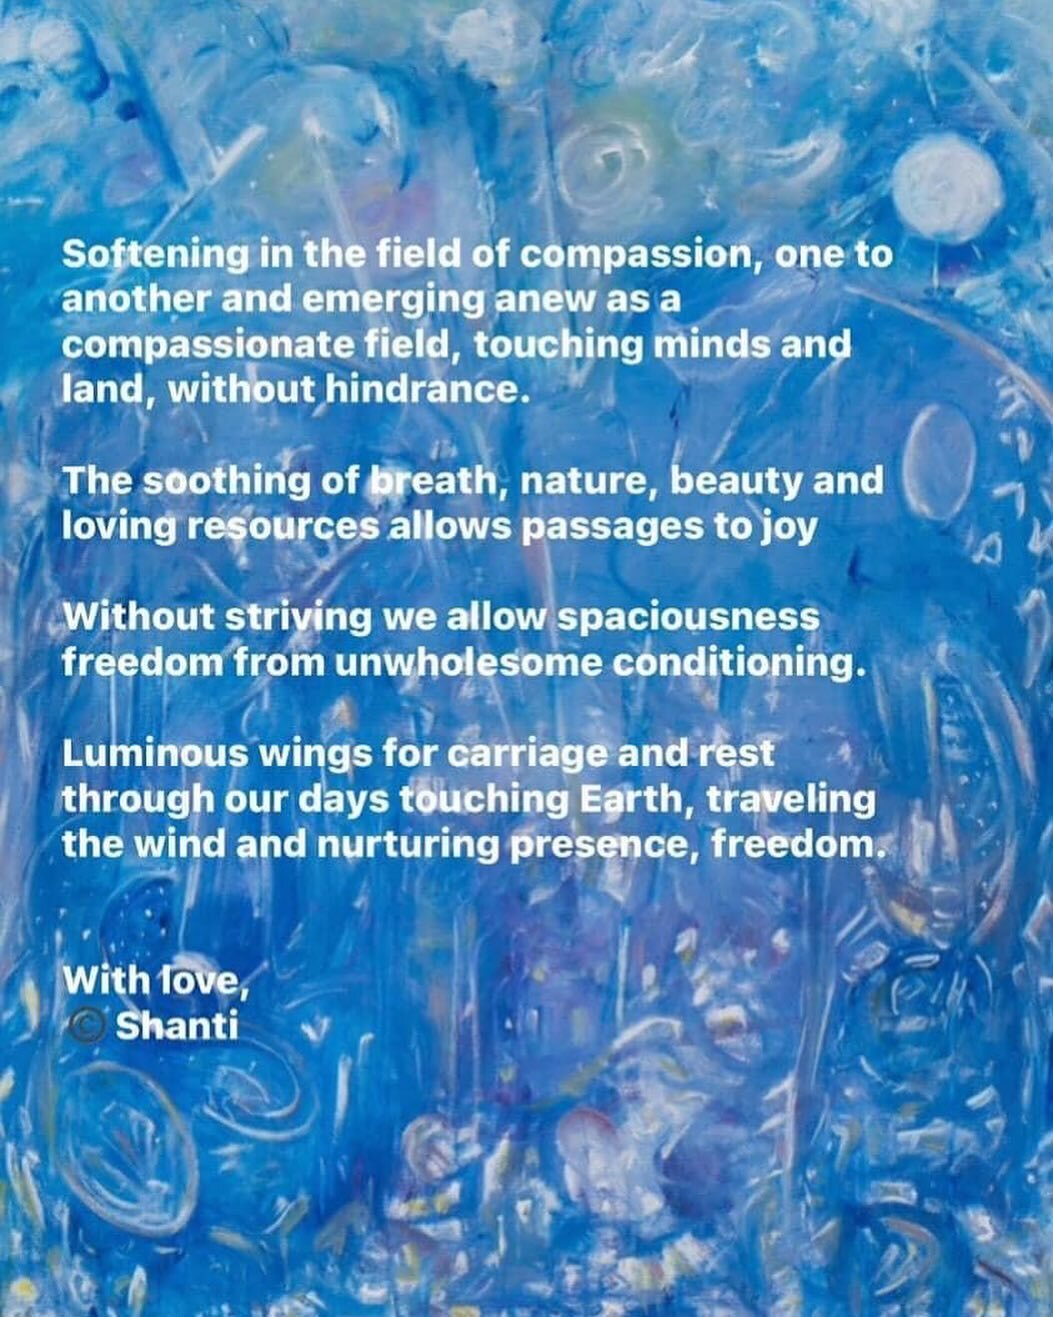 In gratitude for family, wise teachings, ancestors, brilliant far reaching community,  for  our shared heart and hearth.  We are one with the winged, scaled, finned, leafed, all beings,  the Earth herself.
#mindfulnessmeditationteacher ,#coherance #h